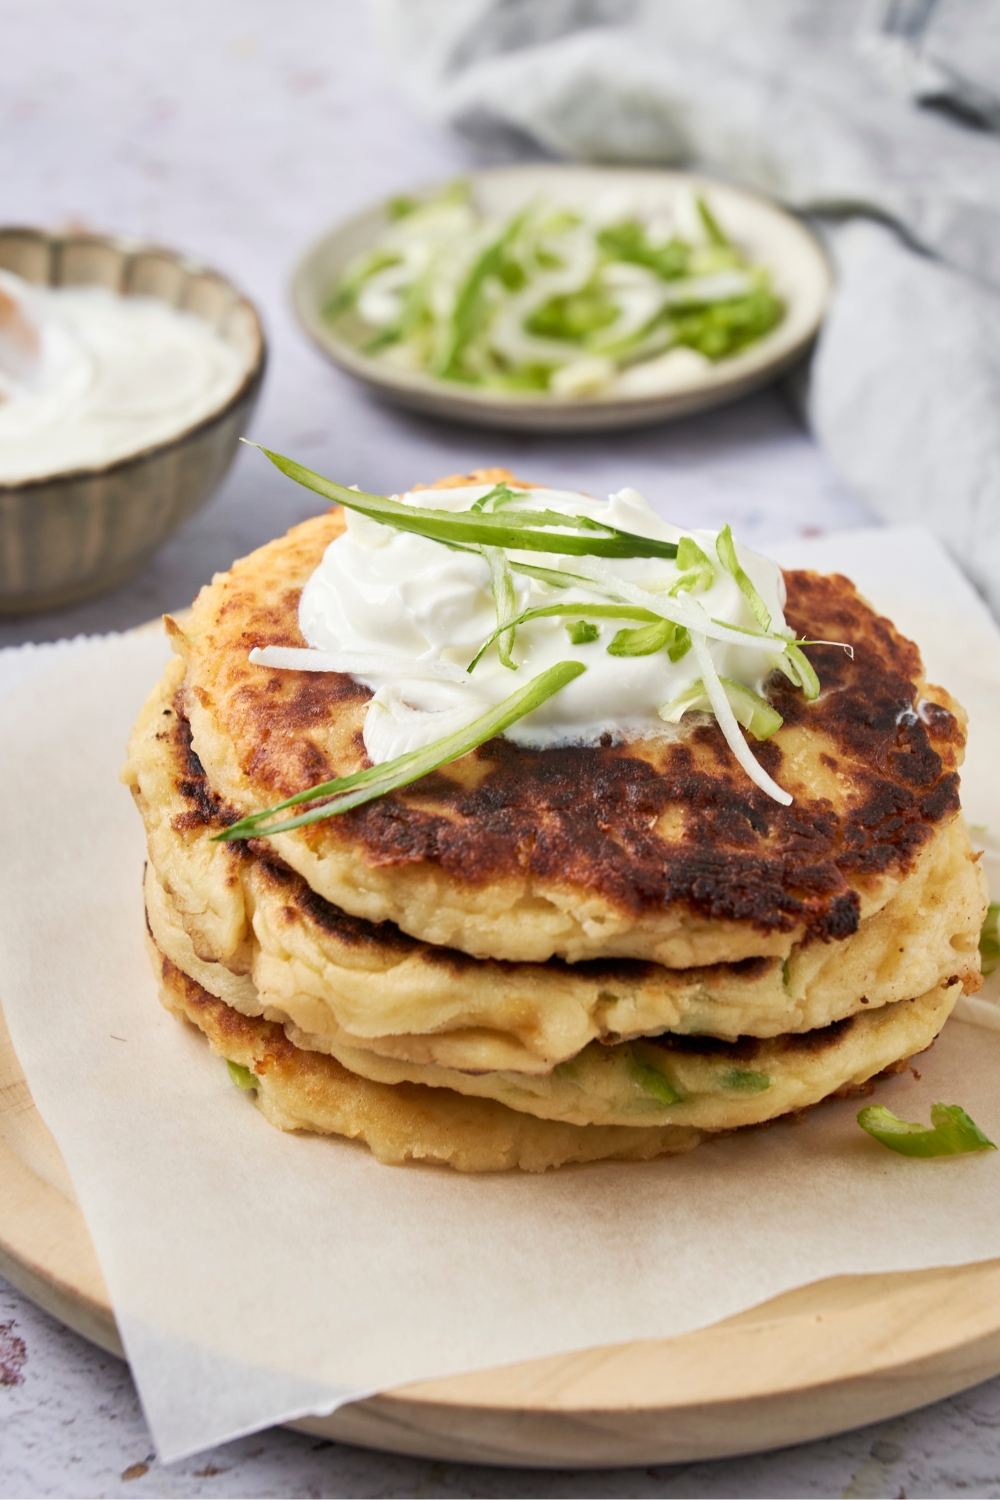 A stack of mashed potato pancakes with sour cream and green onion garnish on a plate.